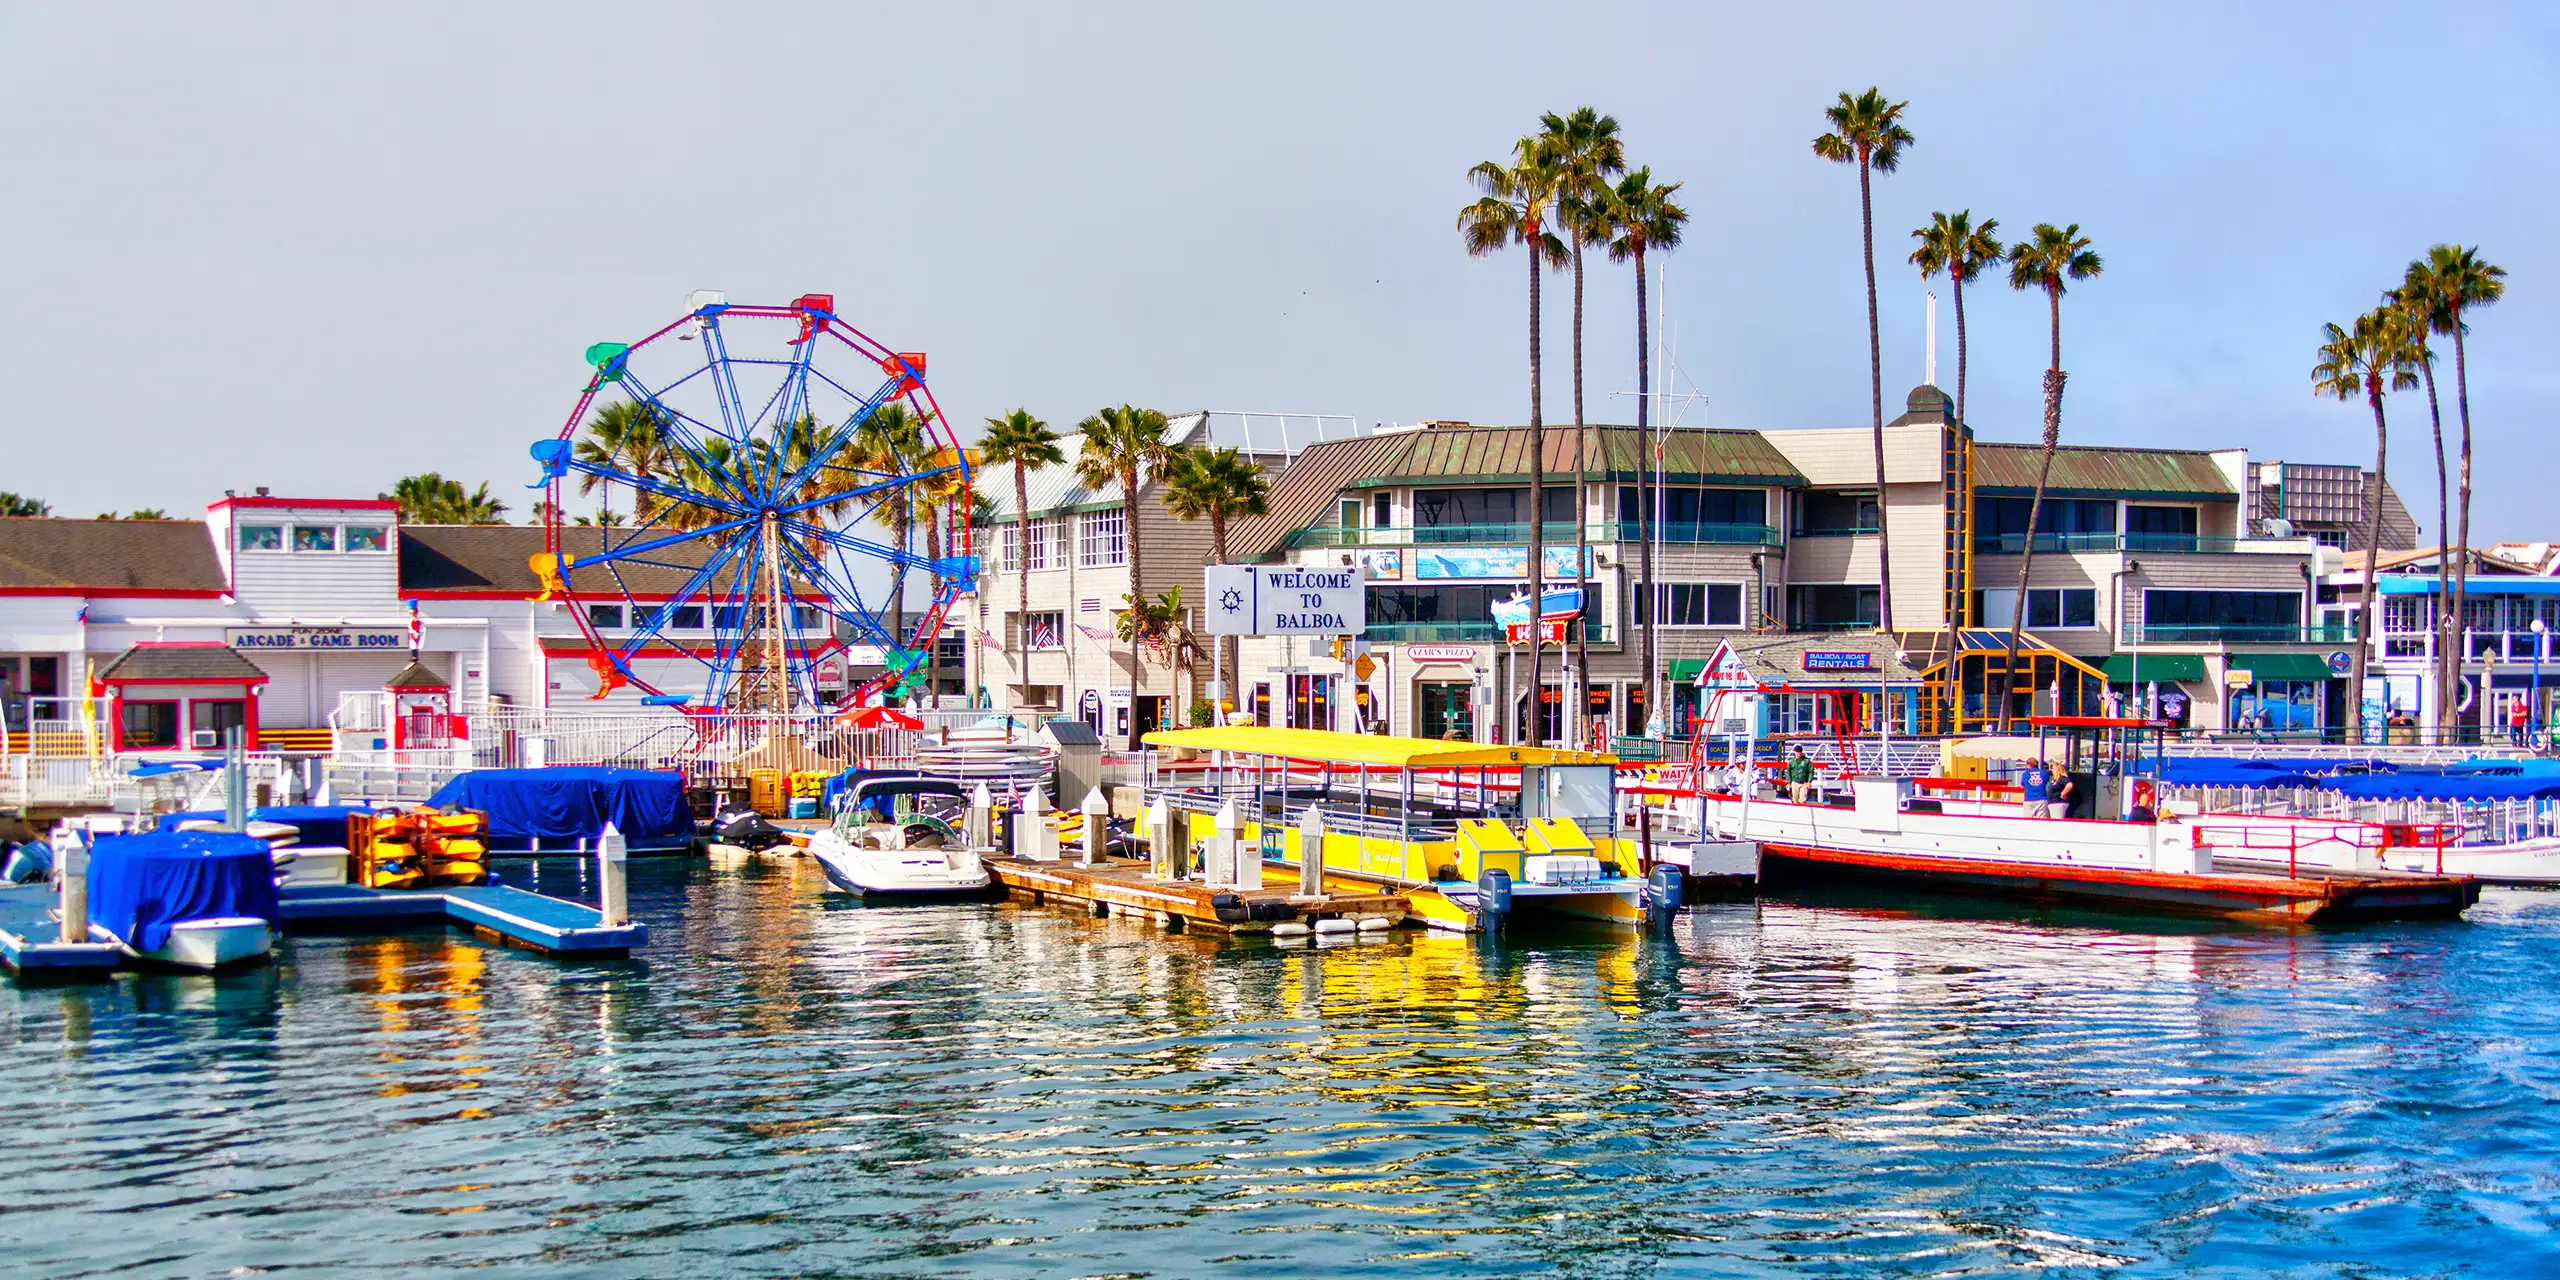 Popular pier at Balboa peninsula in Southern California with ferris wheel, tourist shops, restaurants and boats doting the harbor ferry terminal.; Courtesy of Ronnie Chua/Shutterstock